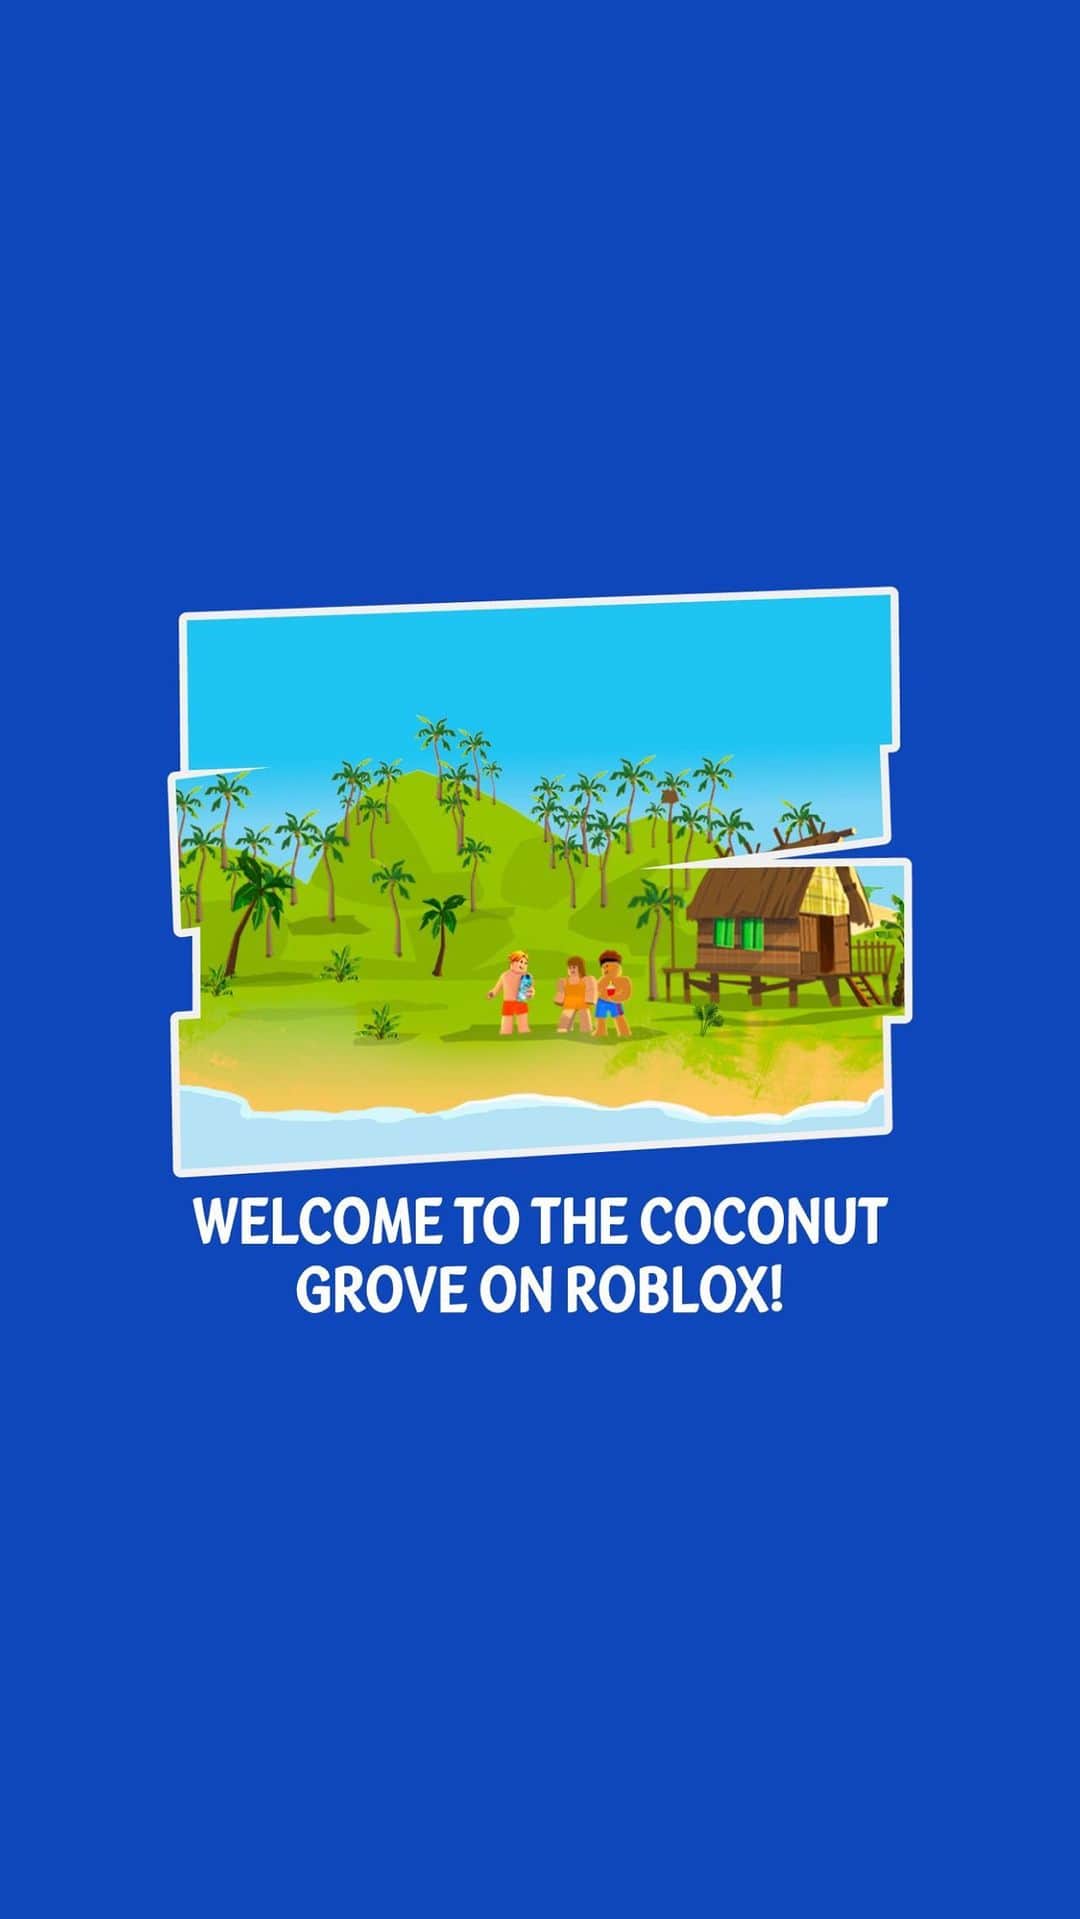 Vita Coco Coconut Waterのインスタグラム：「Welcome to The Coconut Grove on @roblox! In this epic game, you can really do so much —> walk around the island, play mini-games, visit The Coconut Shack, and plant and tend to your seedlings. For every seedling planted in The Coconut Grove, we’ll distribute one in real life through Seedlings for Sustainability, our newest initiative to distribute 10 million seedlings and trees to coconut growing communities and beyond by 2030.*  Now that we got all of that explaining out of the way, let’s get planting! 🌱  Here’s how you can play: Click the link in bio Log in or create an account on @Roblox Enter the experience by clicking the green play button on The Coconut Grove   *We’ll match up to 100K seedlings based on activity within The Coconut Grove.」